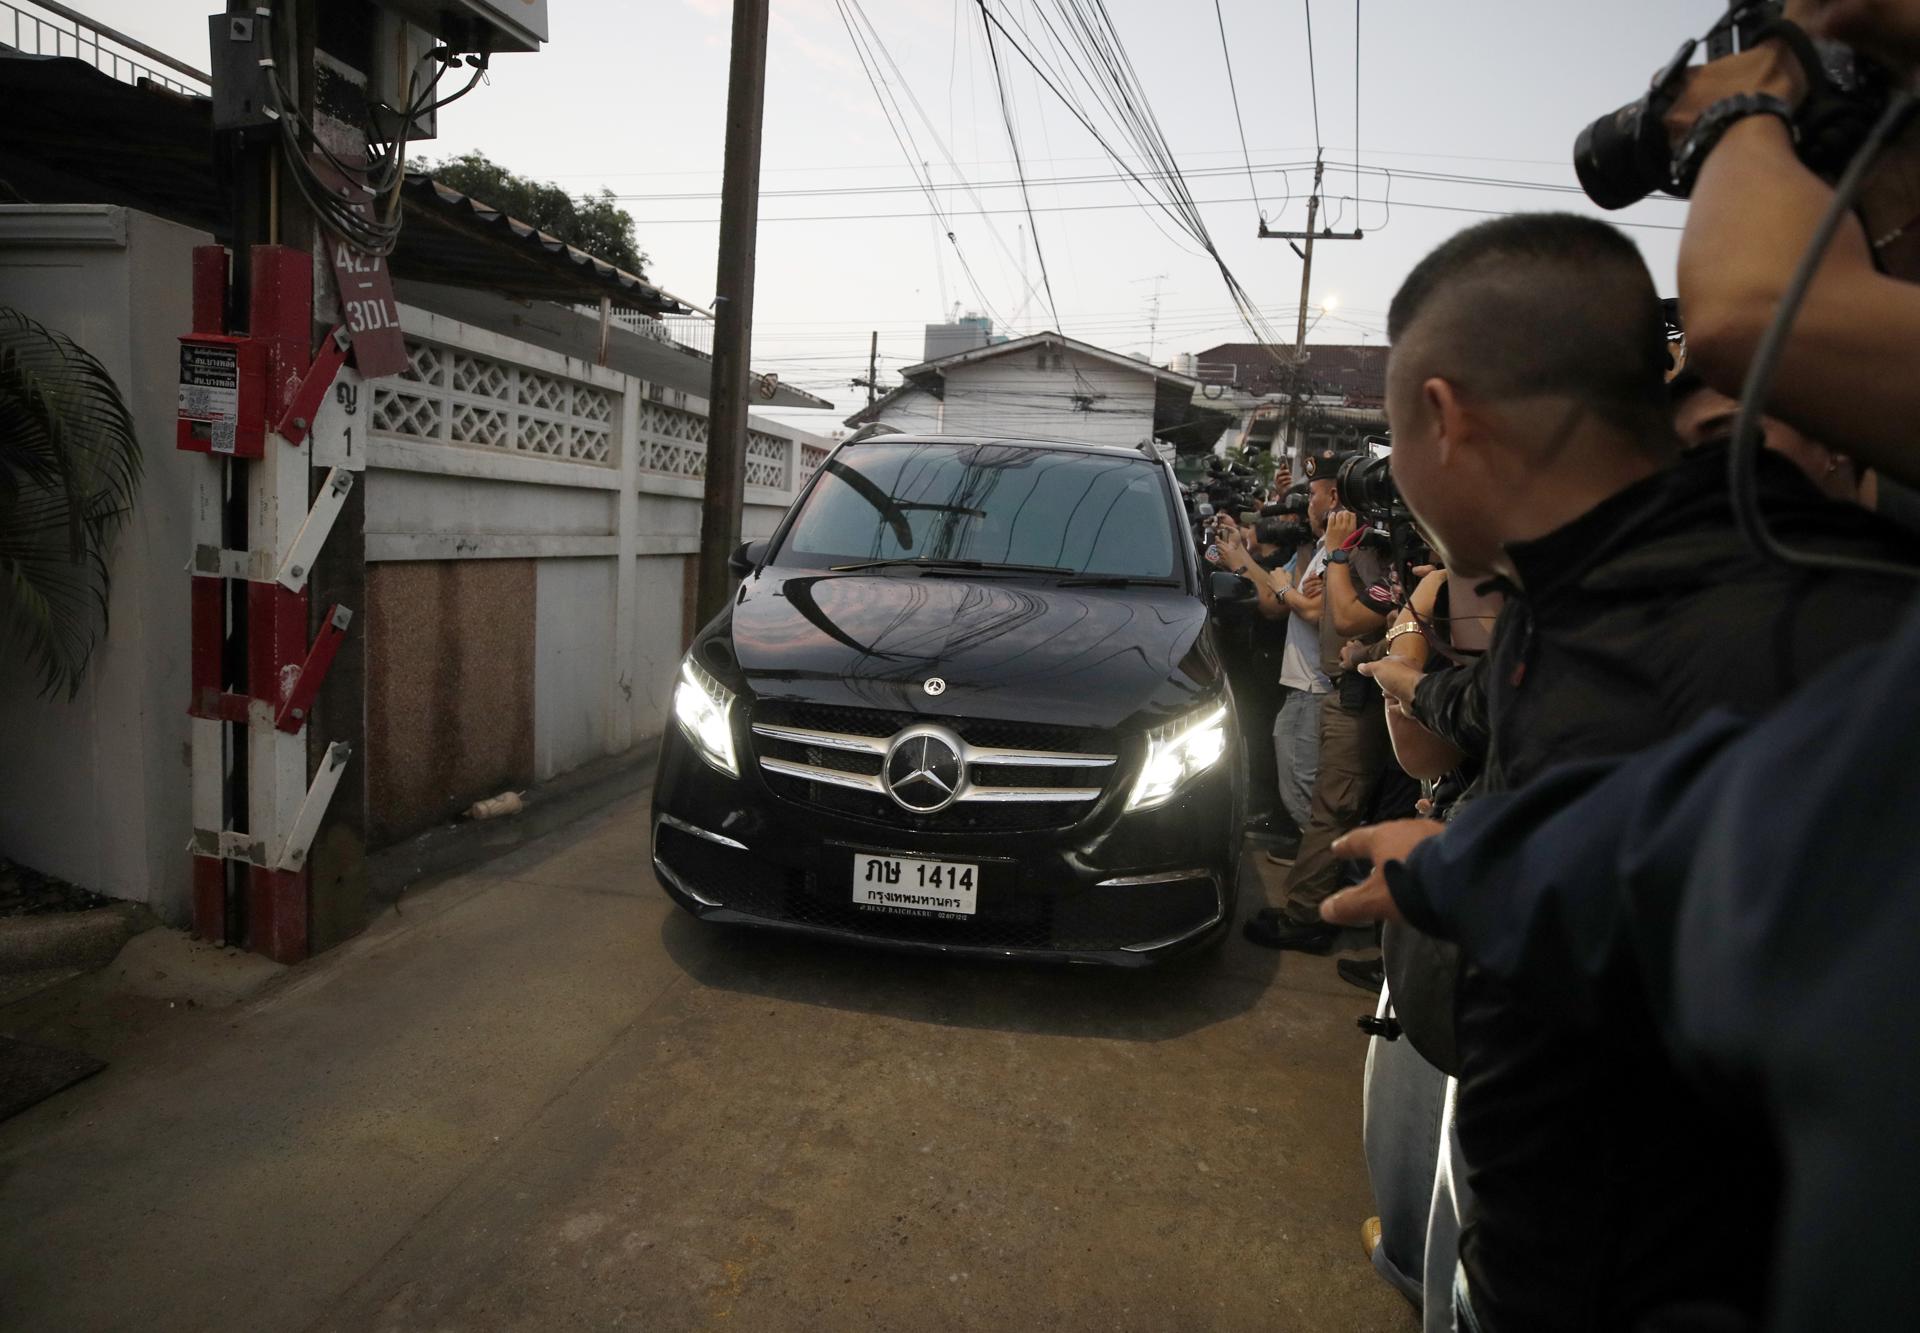 Bangkok (Thailand), 18/02/2024.- A vehicle carrying former Thai Prime Minister Thaksin Shinawatra drives towards his house after he was freed on parole in Bangkok, Thailand, 18 February 2024. Convicted former Prime Minister Shinawatra, 74, was among 930 prisoners freed from prison on parole, due to his age and 'serious illness'. (Tailandia) EFE/EPA/NARONG SANGNAK